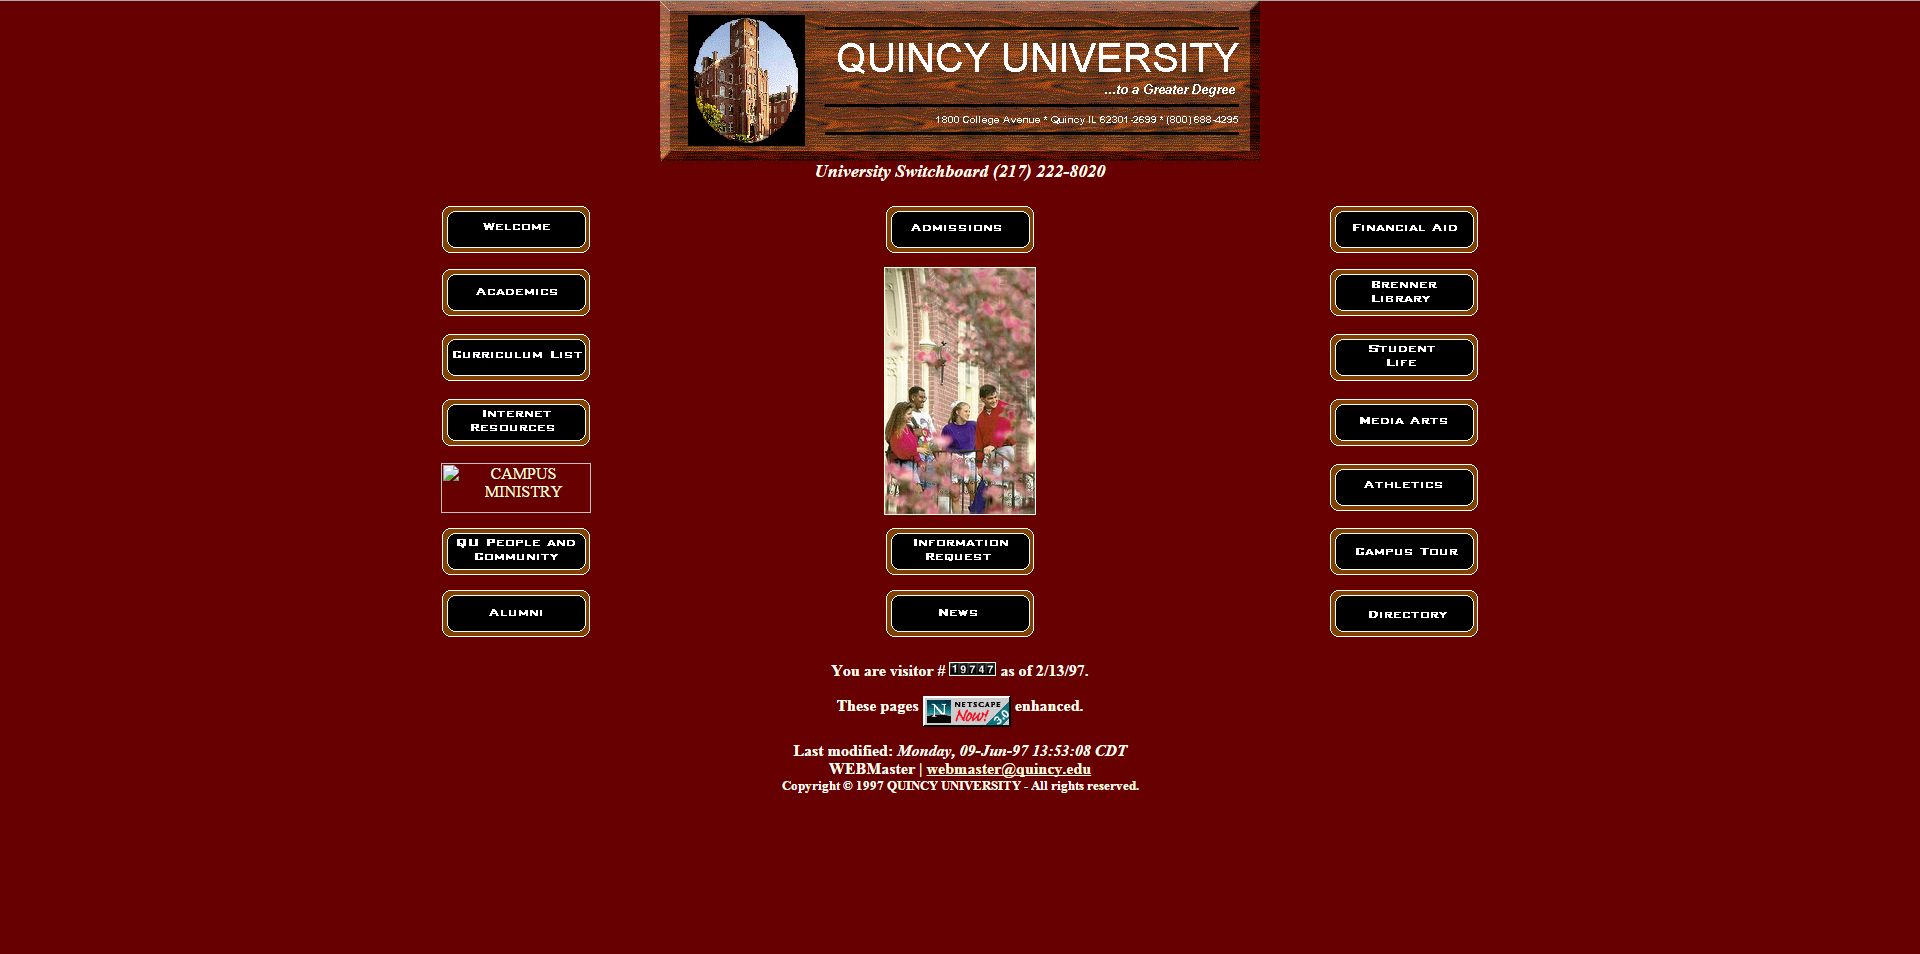 1996 -- Quincy University Launches Its First Website